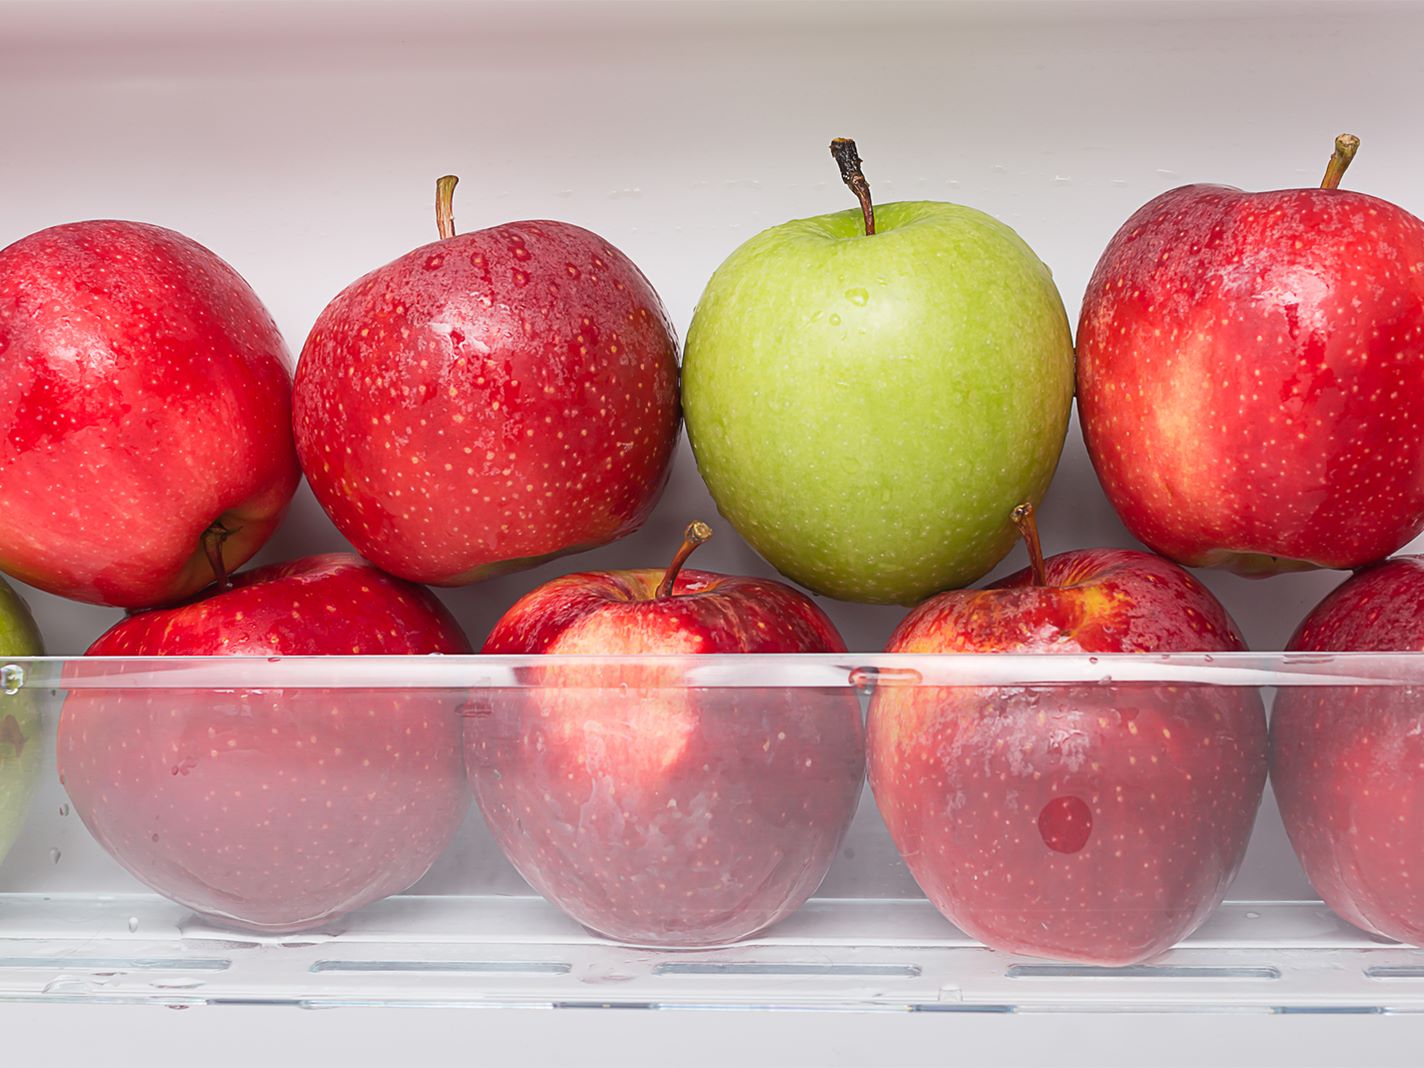 How To Store Apples In Fridge